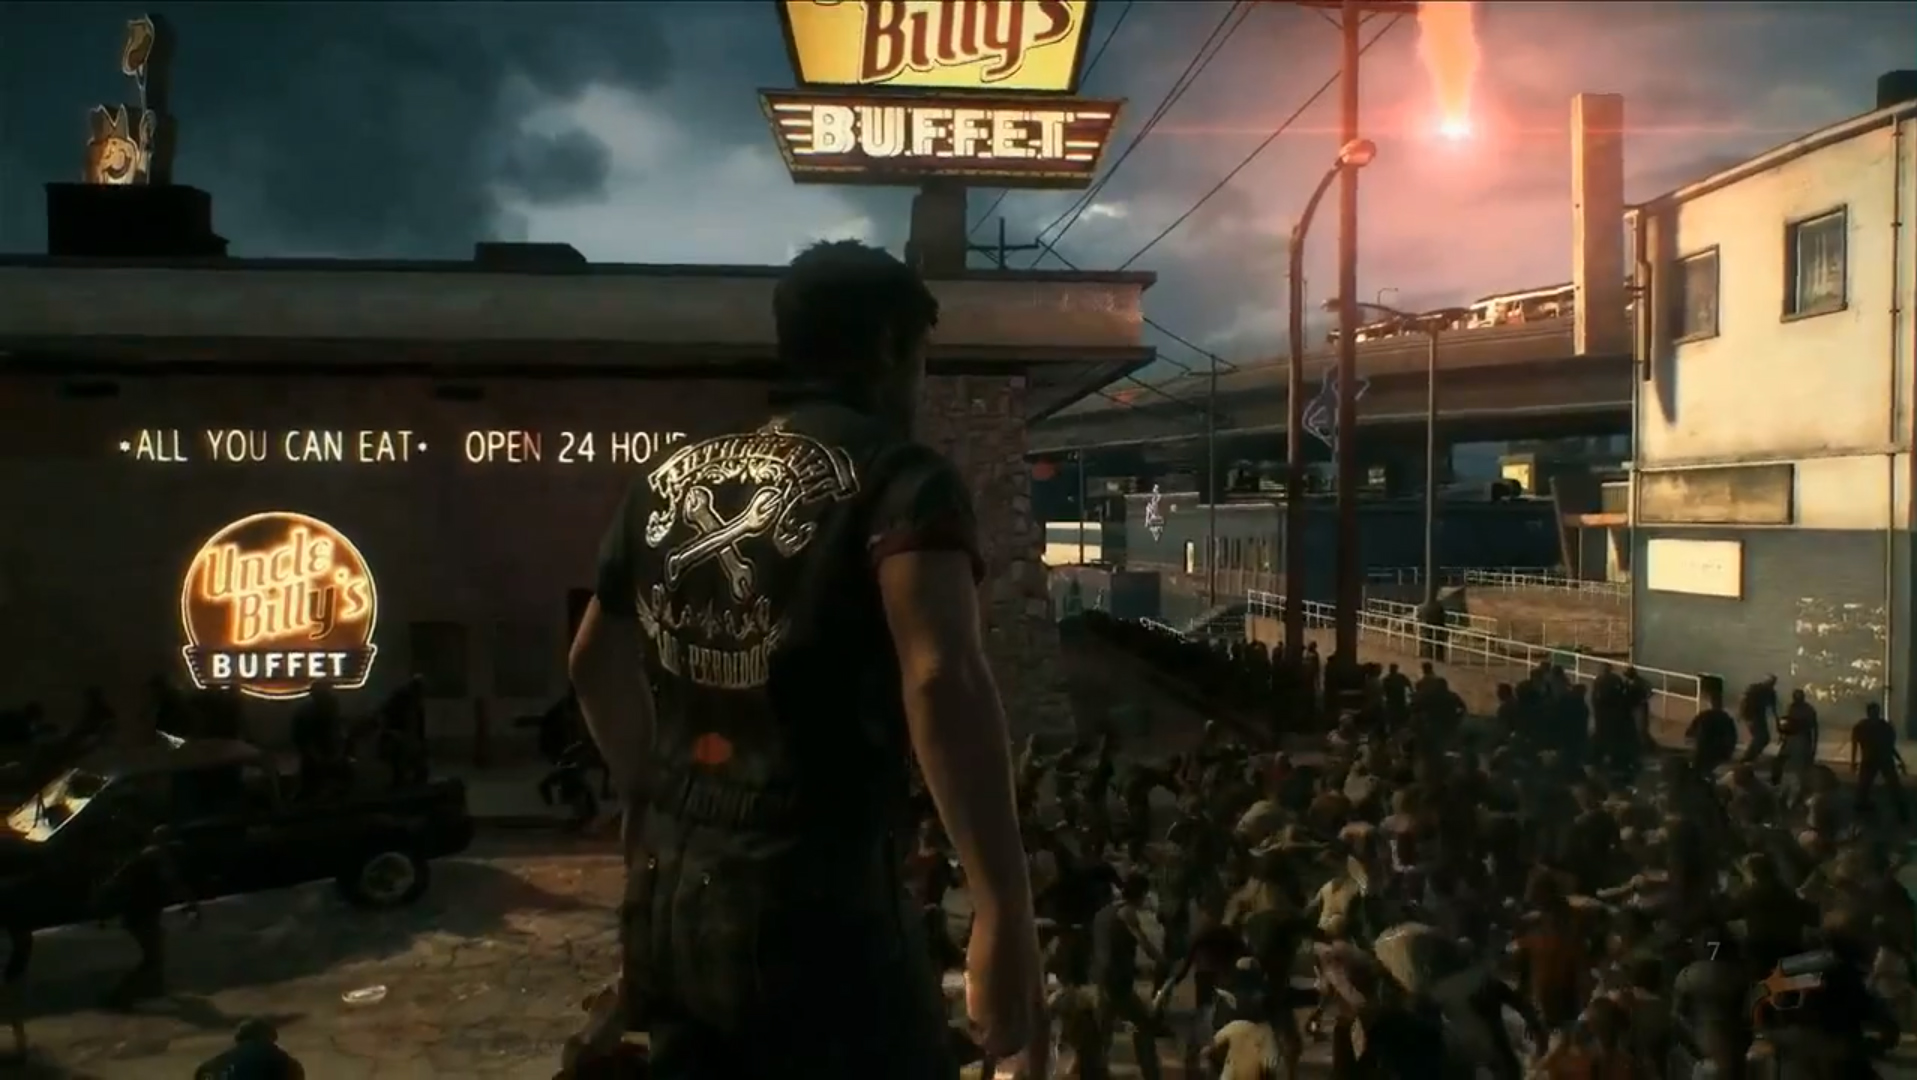 Dead Rising 3 (2013) - Microsoft XBox One - Action Adventure Zombie Video  Game